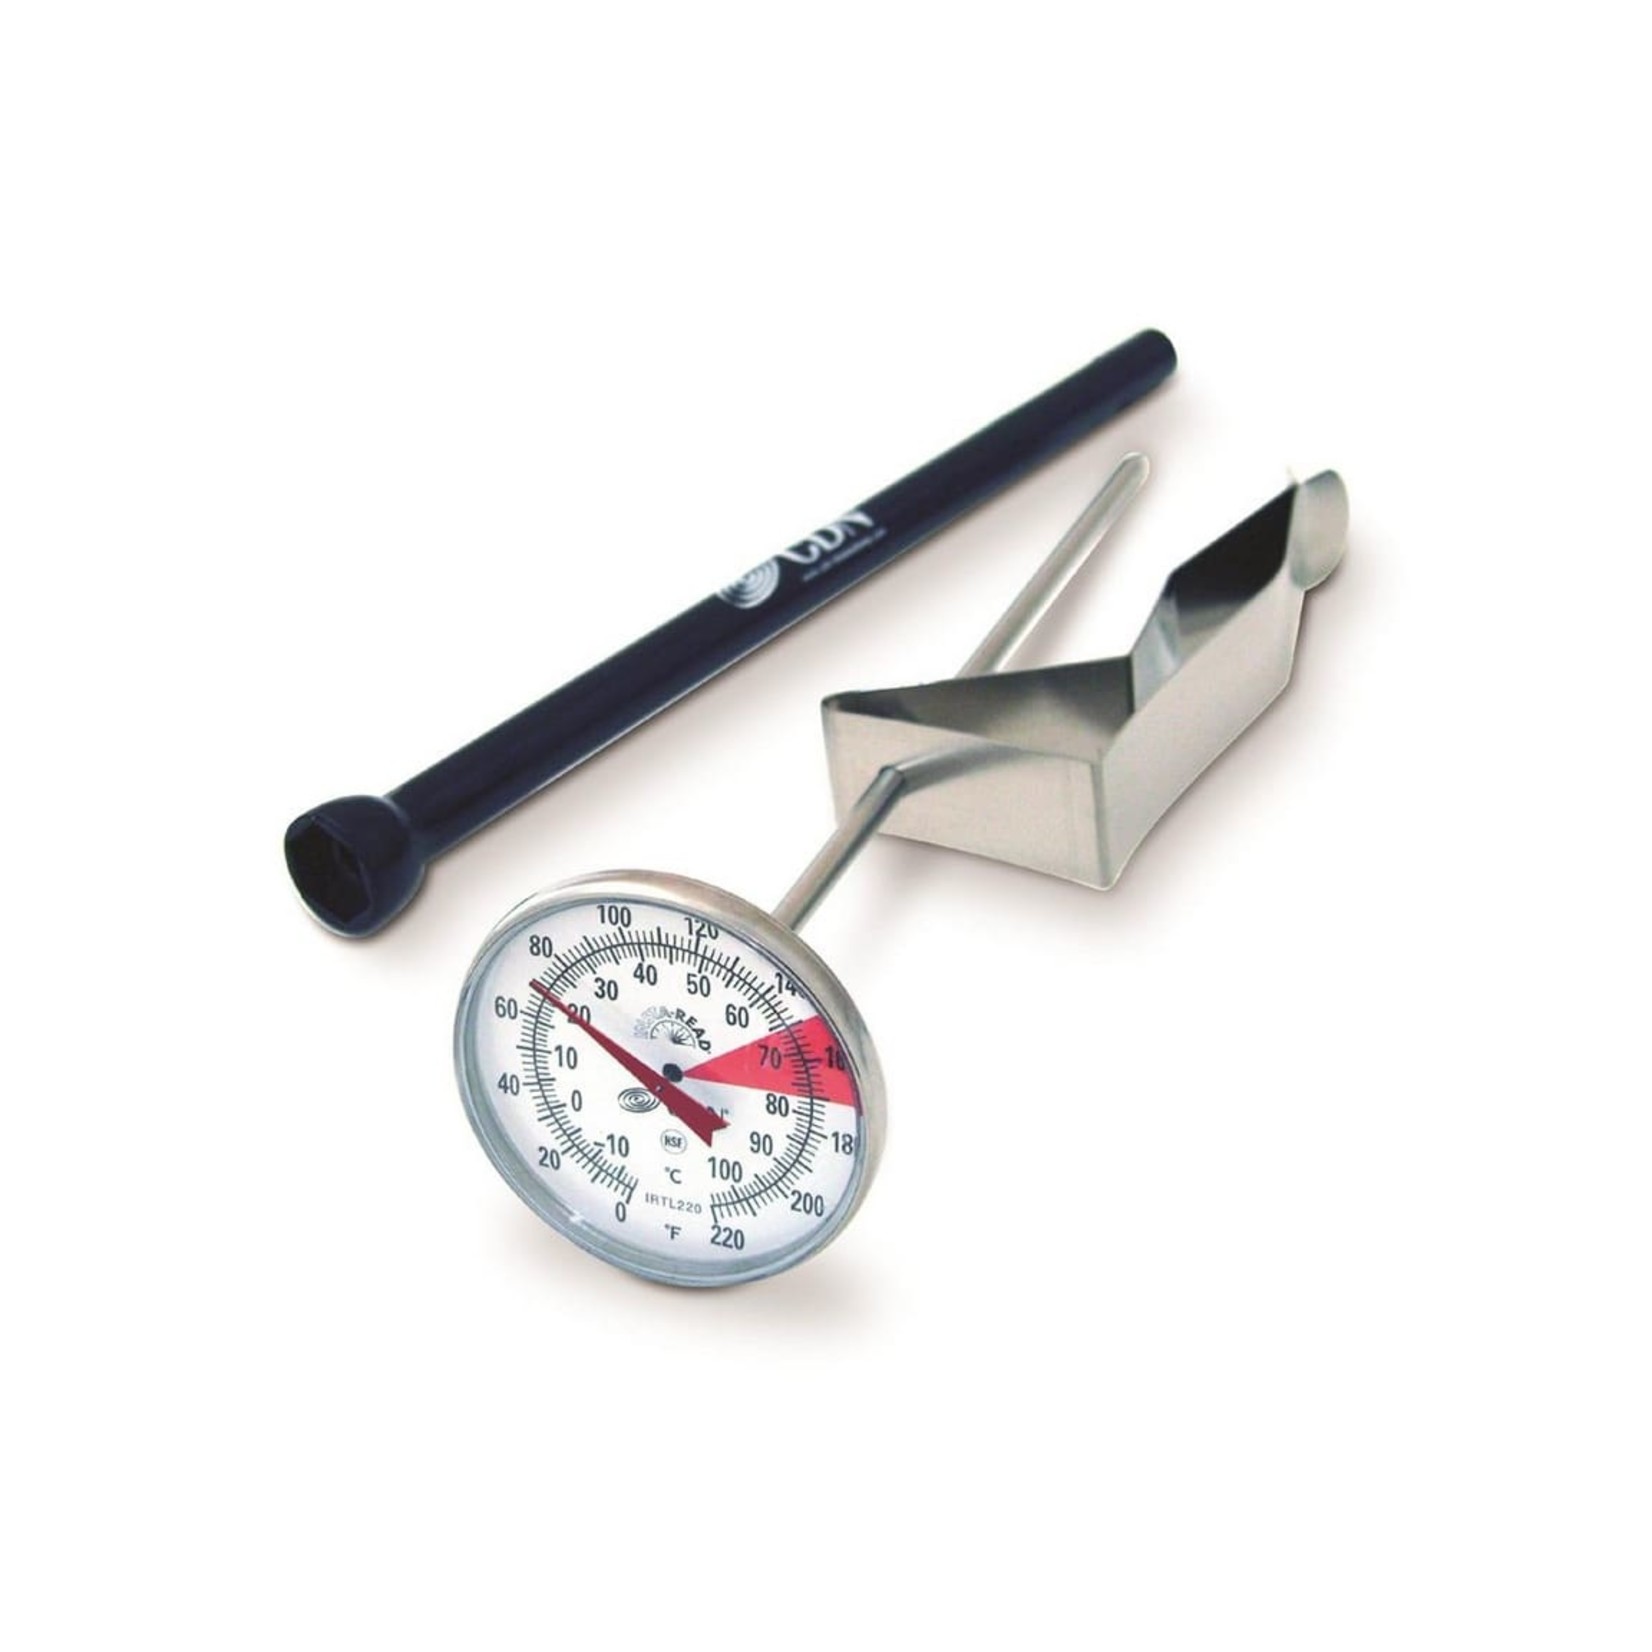 CDN CDN ProAccurate Large Dial Frothing Thermometer